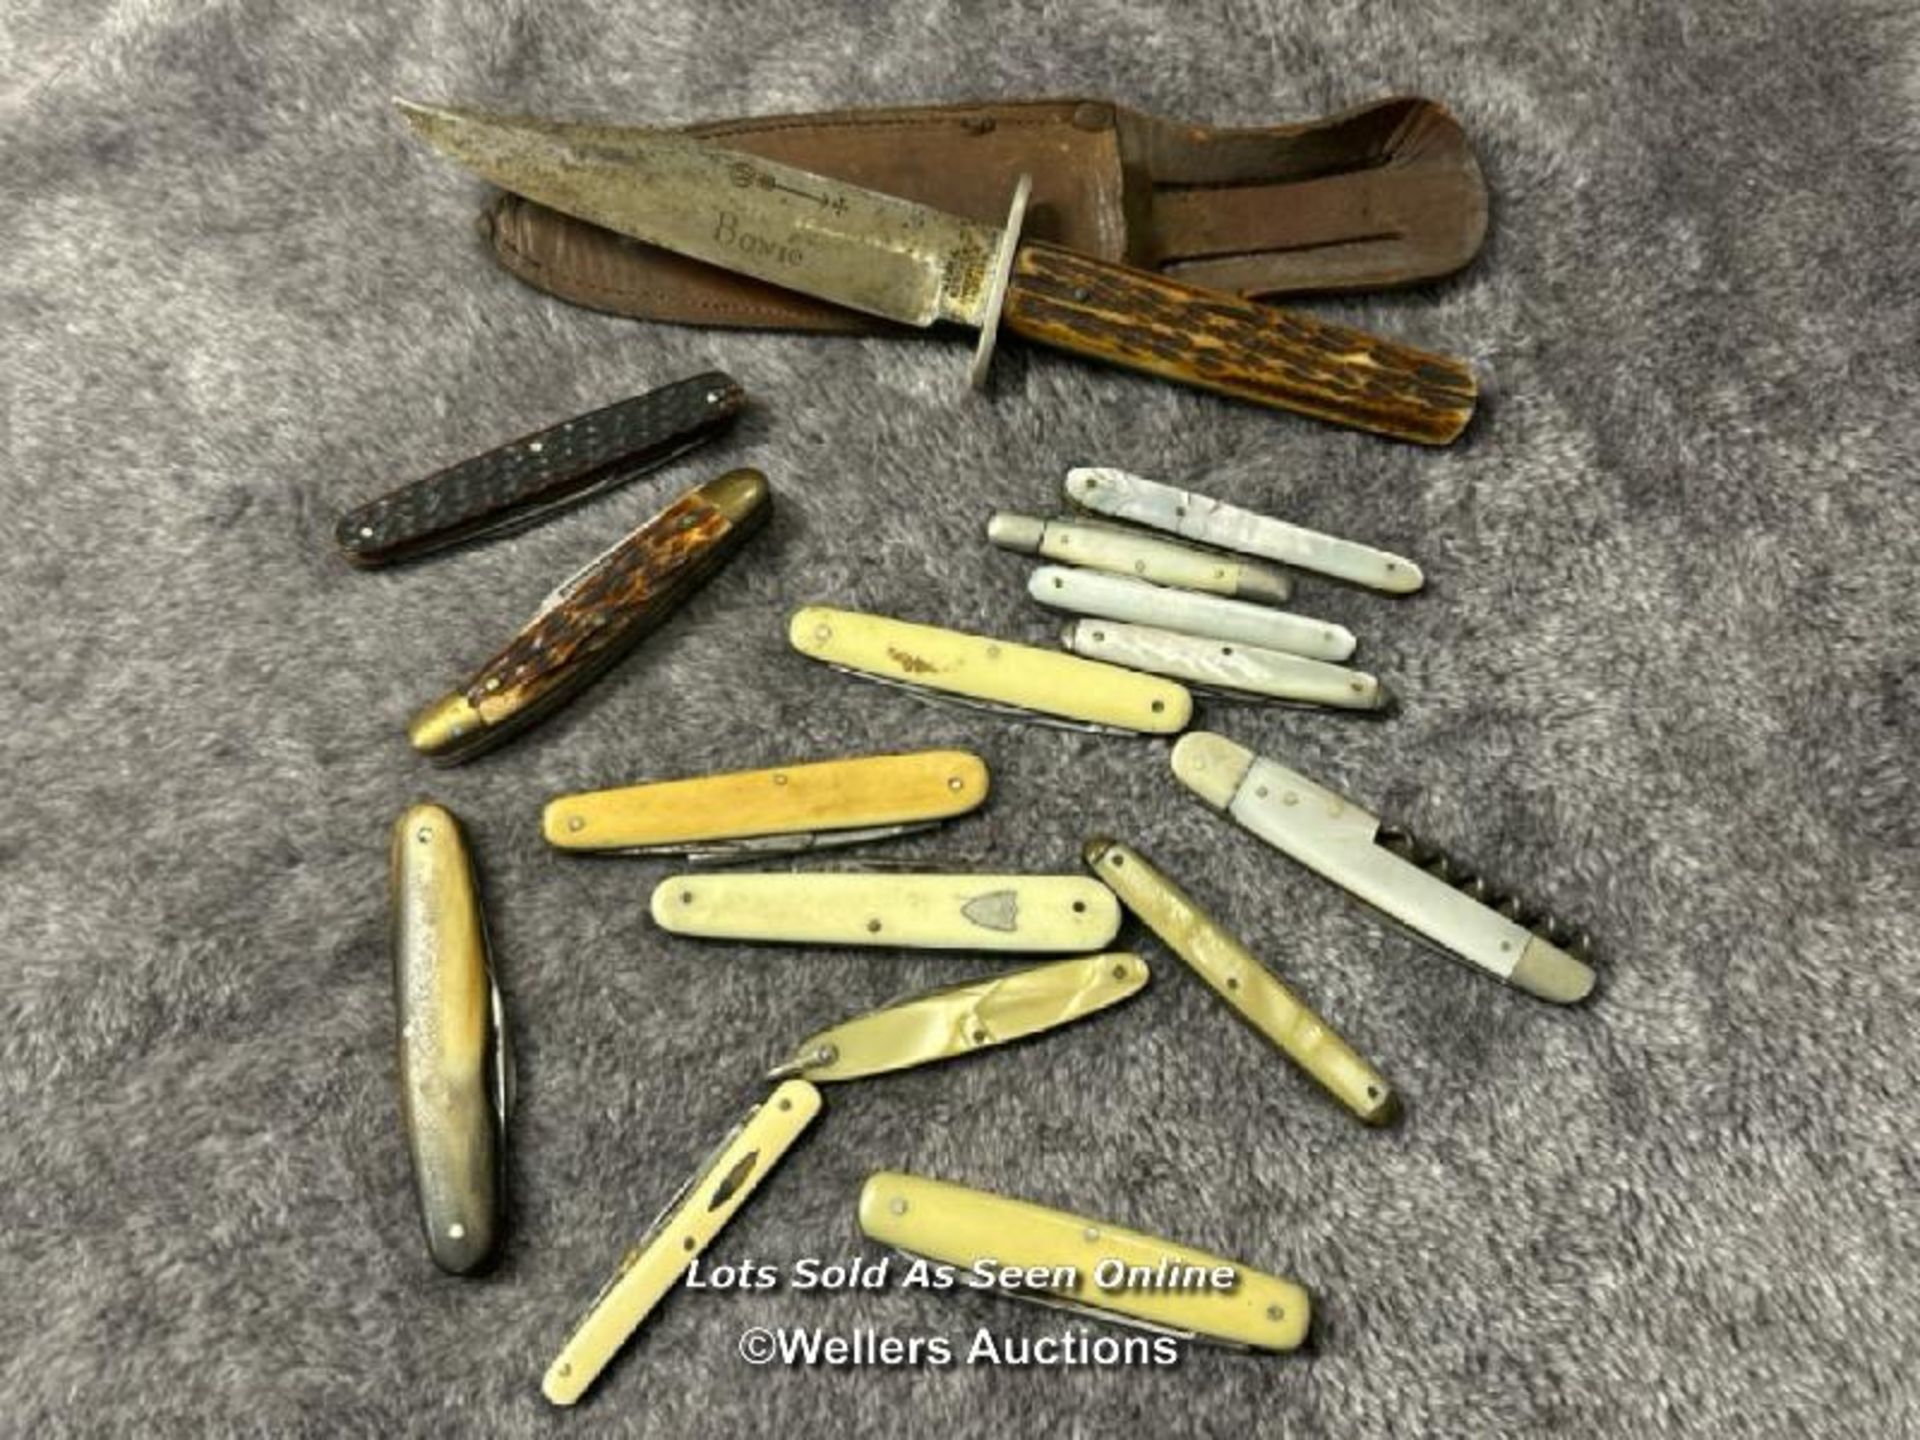 Collection of assorted knives and multi tools including horn handled "Bowie" knife and mother of